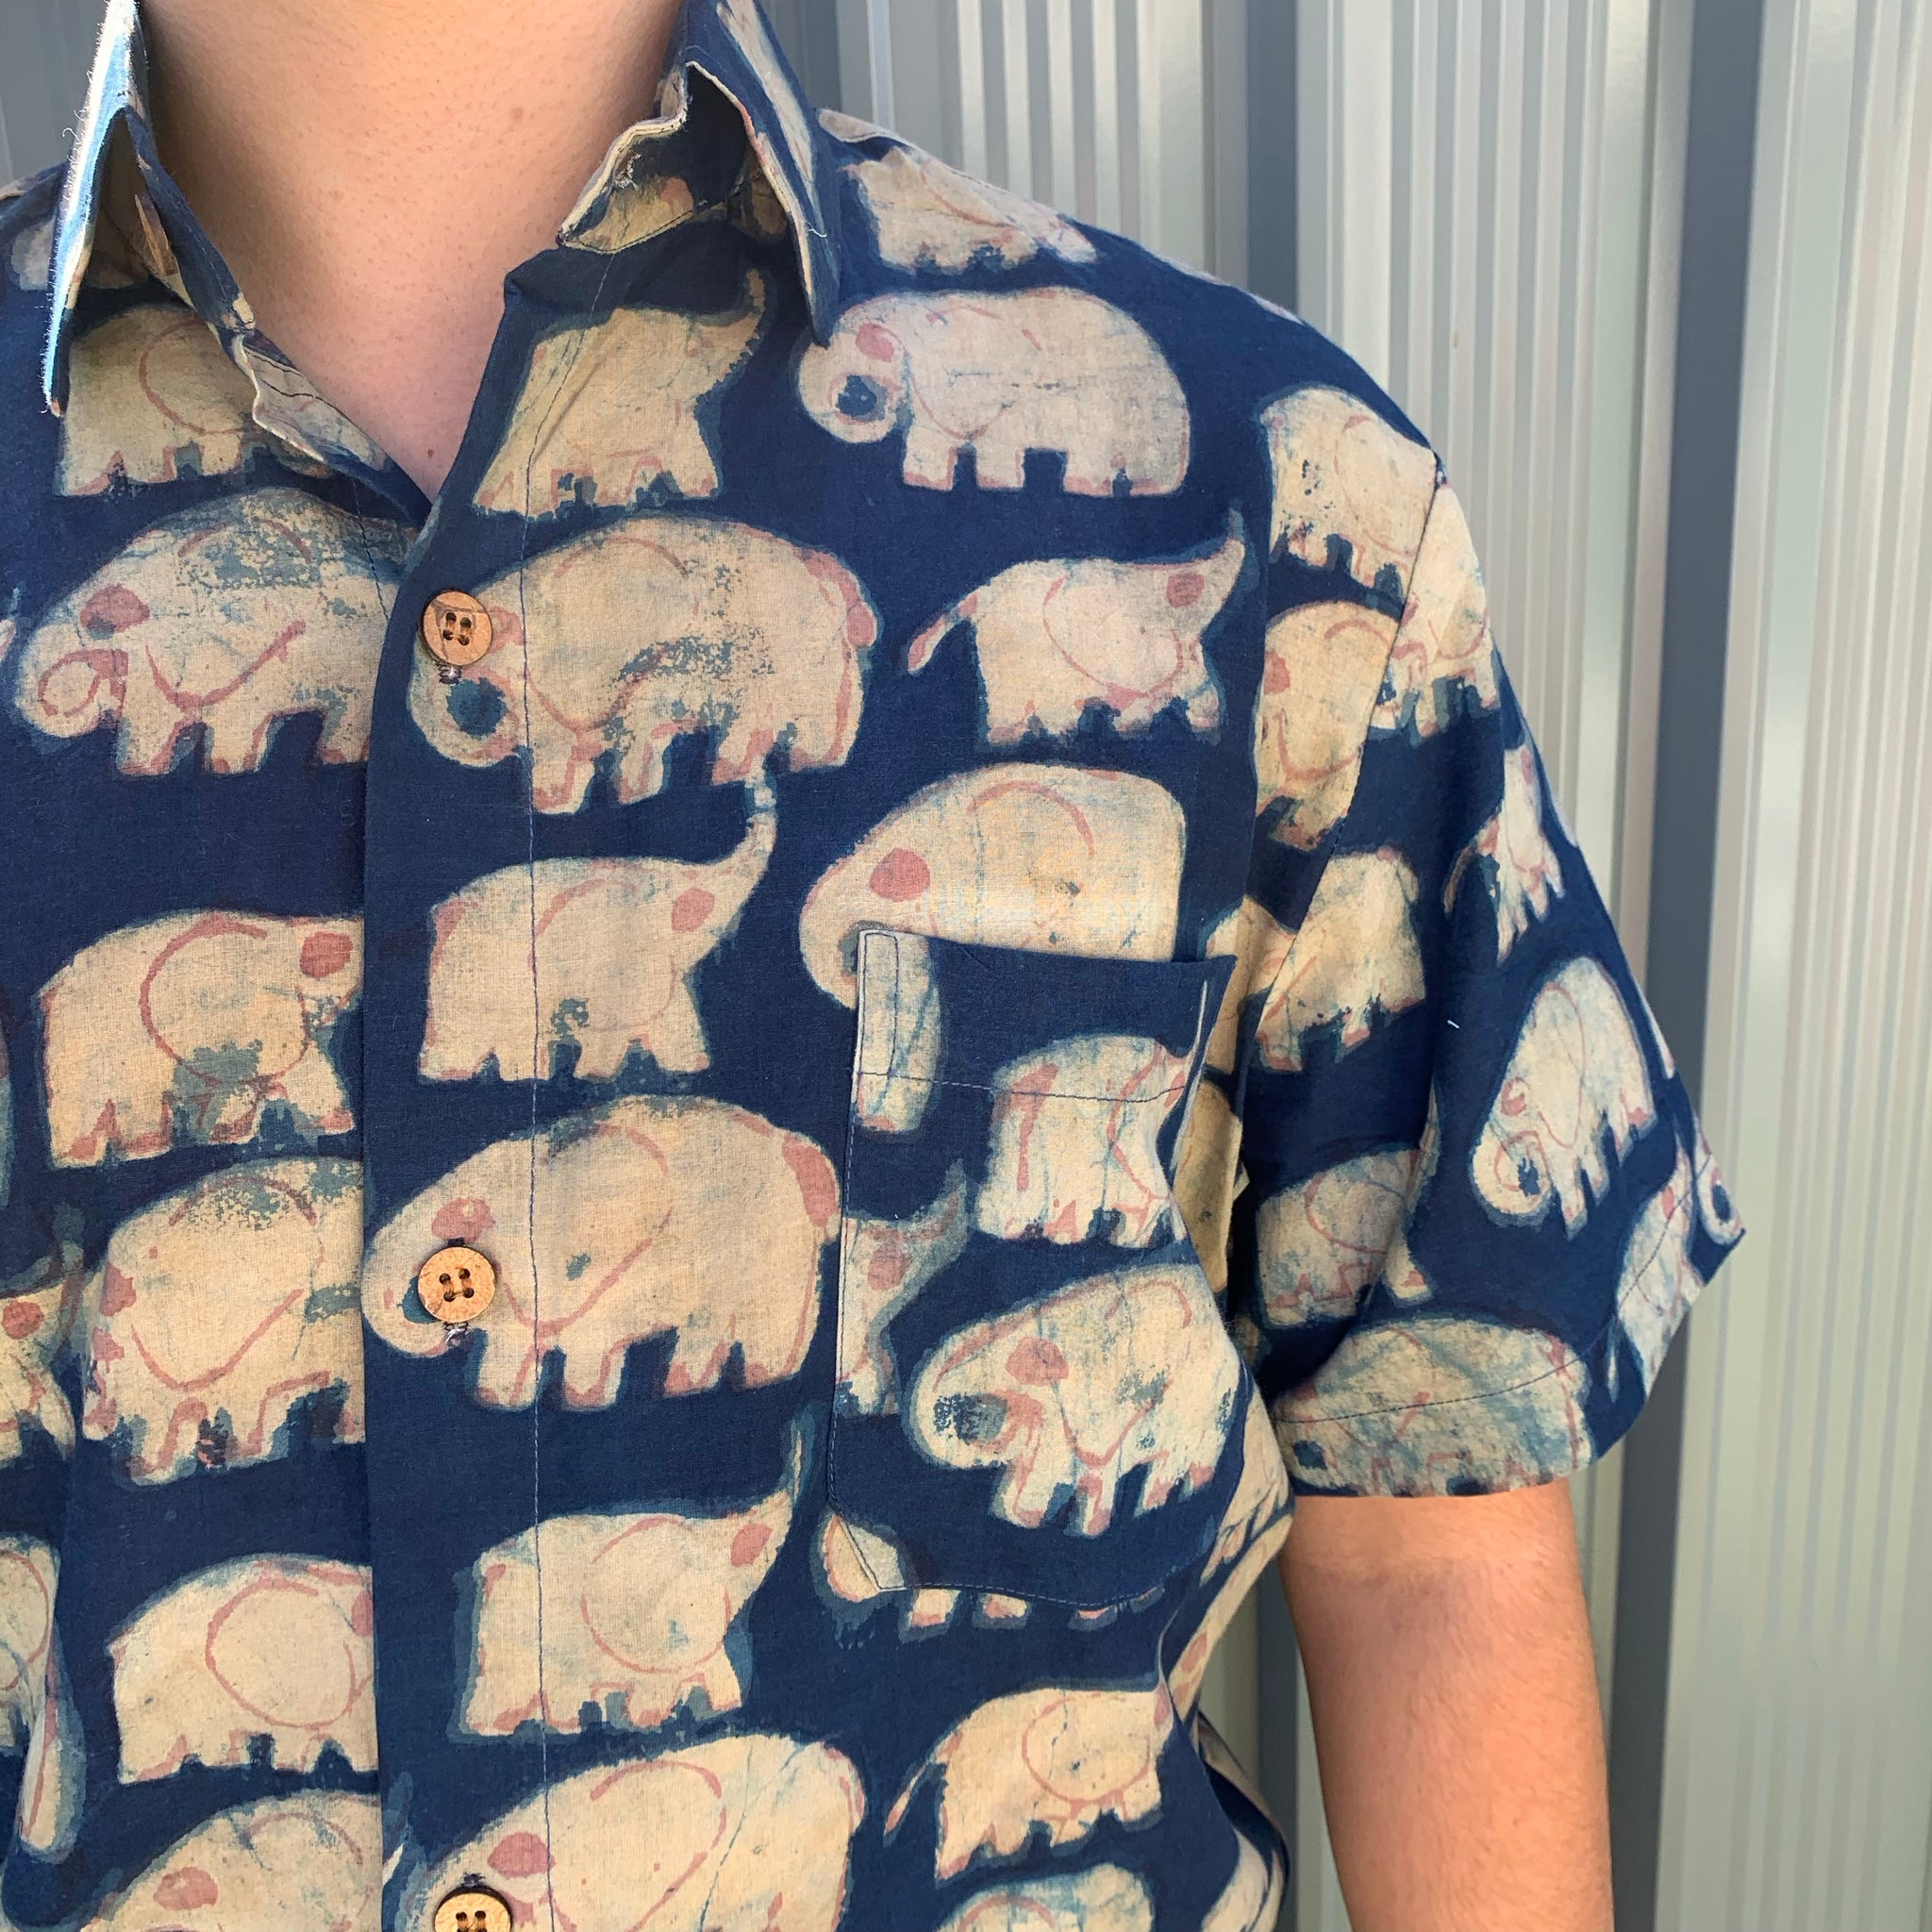 Fair Trade Ethical Mud Resistant Cotton Shirt in Elephant Design